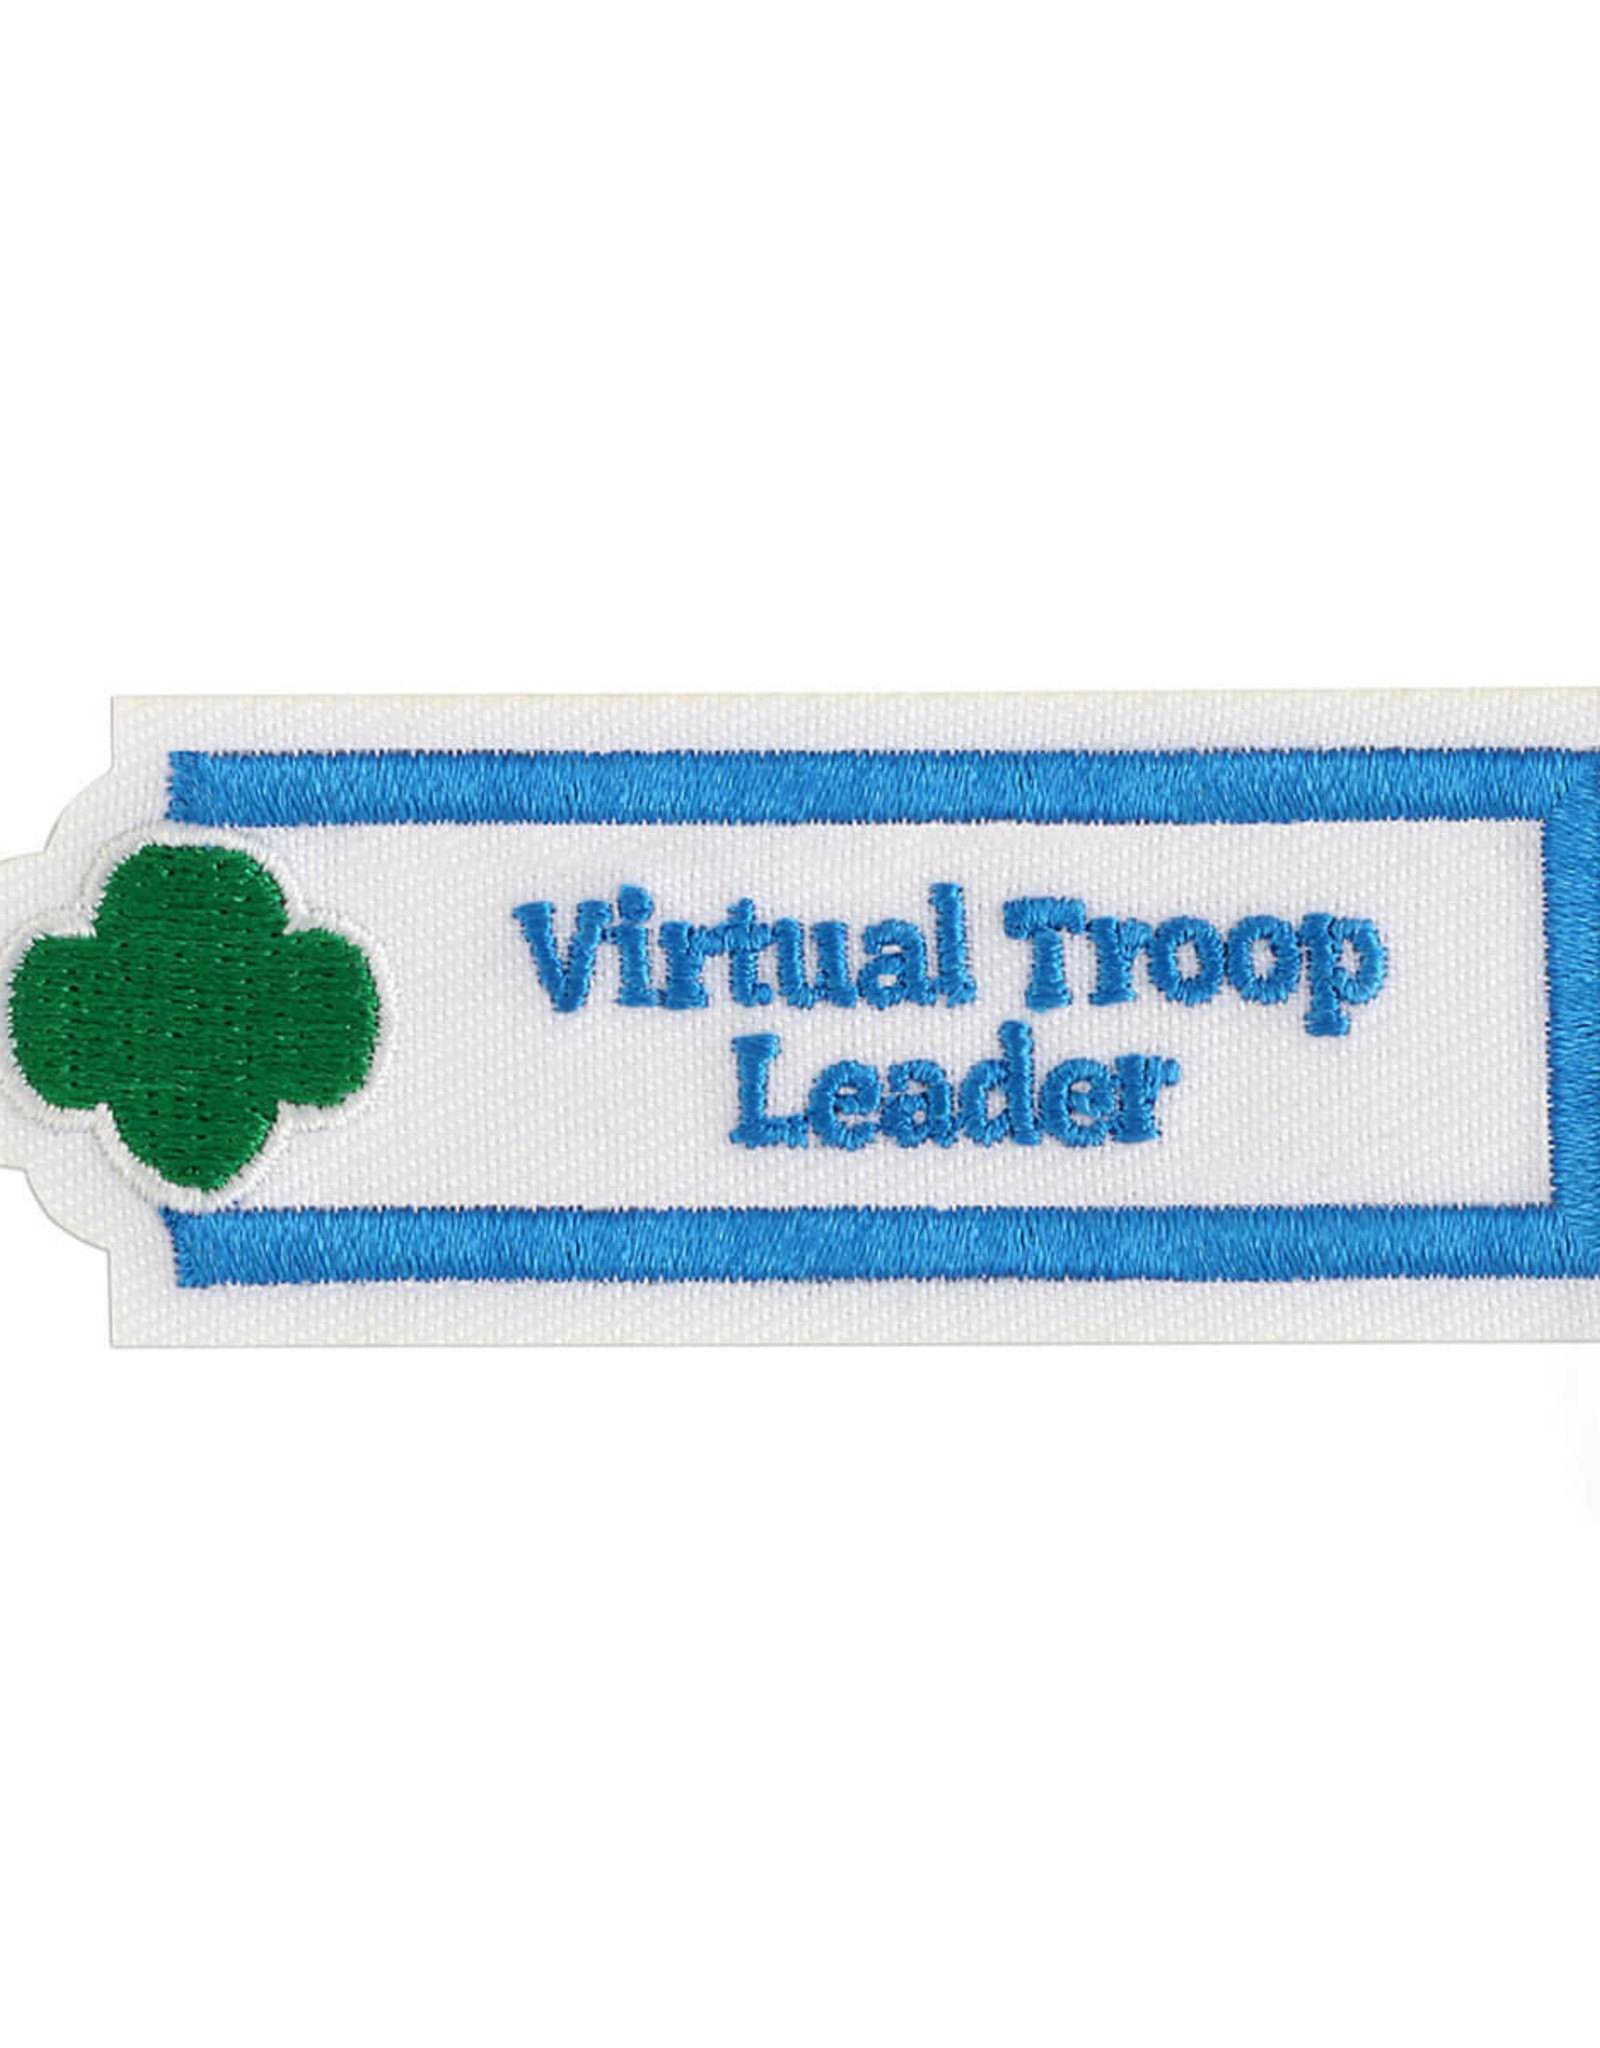 GIRL SCOUTS OF THE USA Virtual Troop Leader Adult Achievement Patch